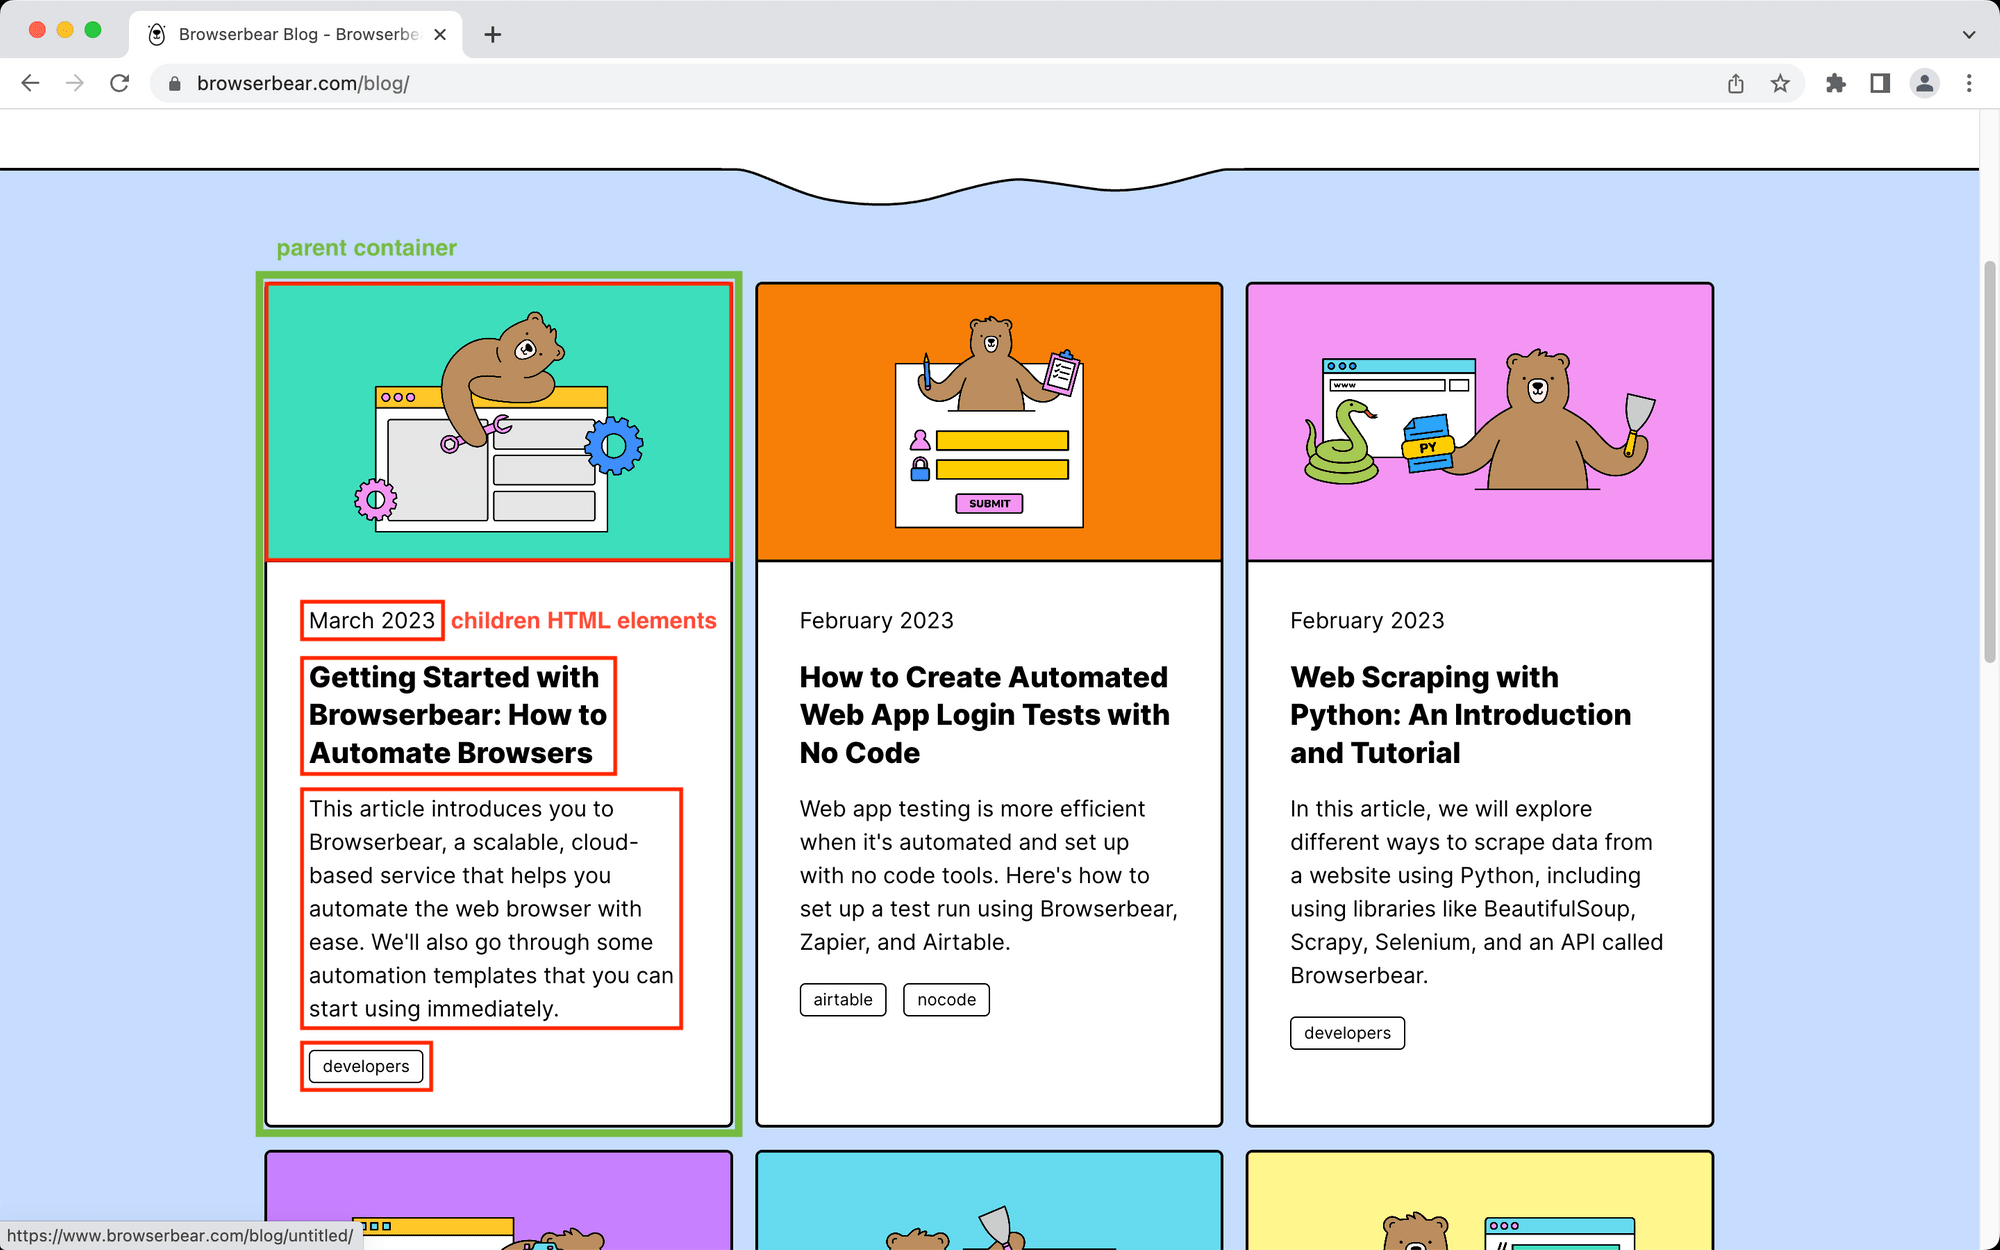 Screenshot of Browserbear blog parent container and children HTML elements outlined